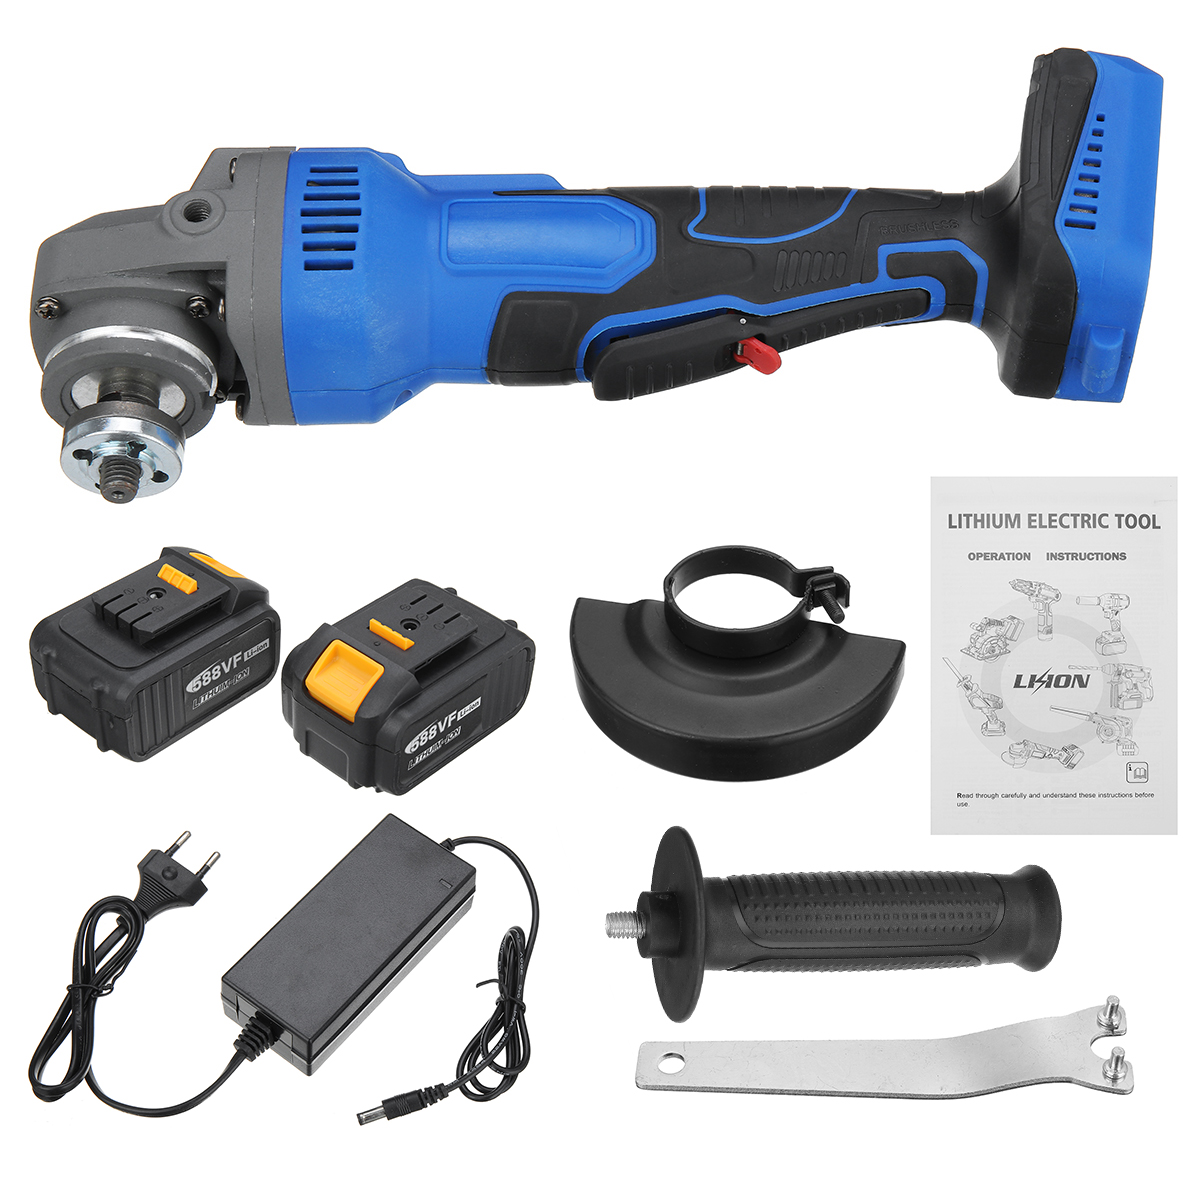 588VF-Cordless-Brushless-100mm-1580W-Electric-Angle-Grinder-3-Gears-Adjustable-Grinding-Machine-Poli-1941456-21